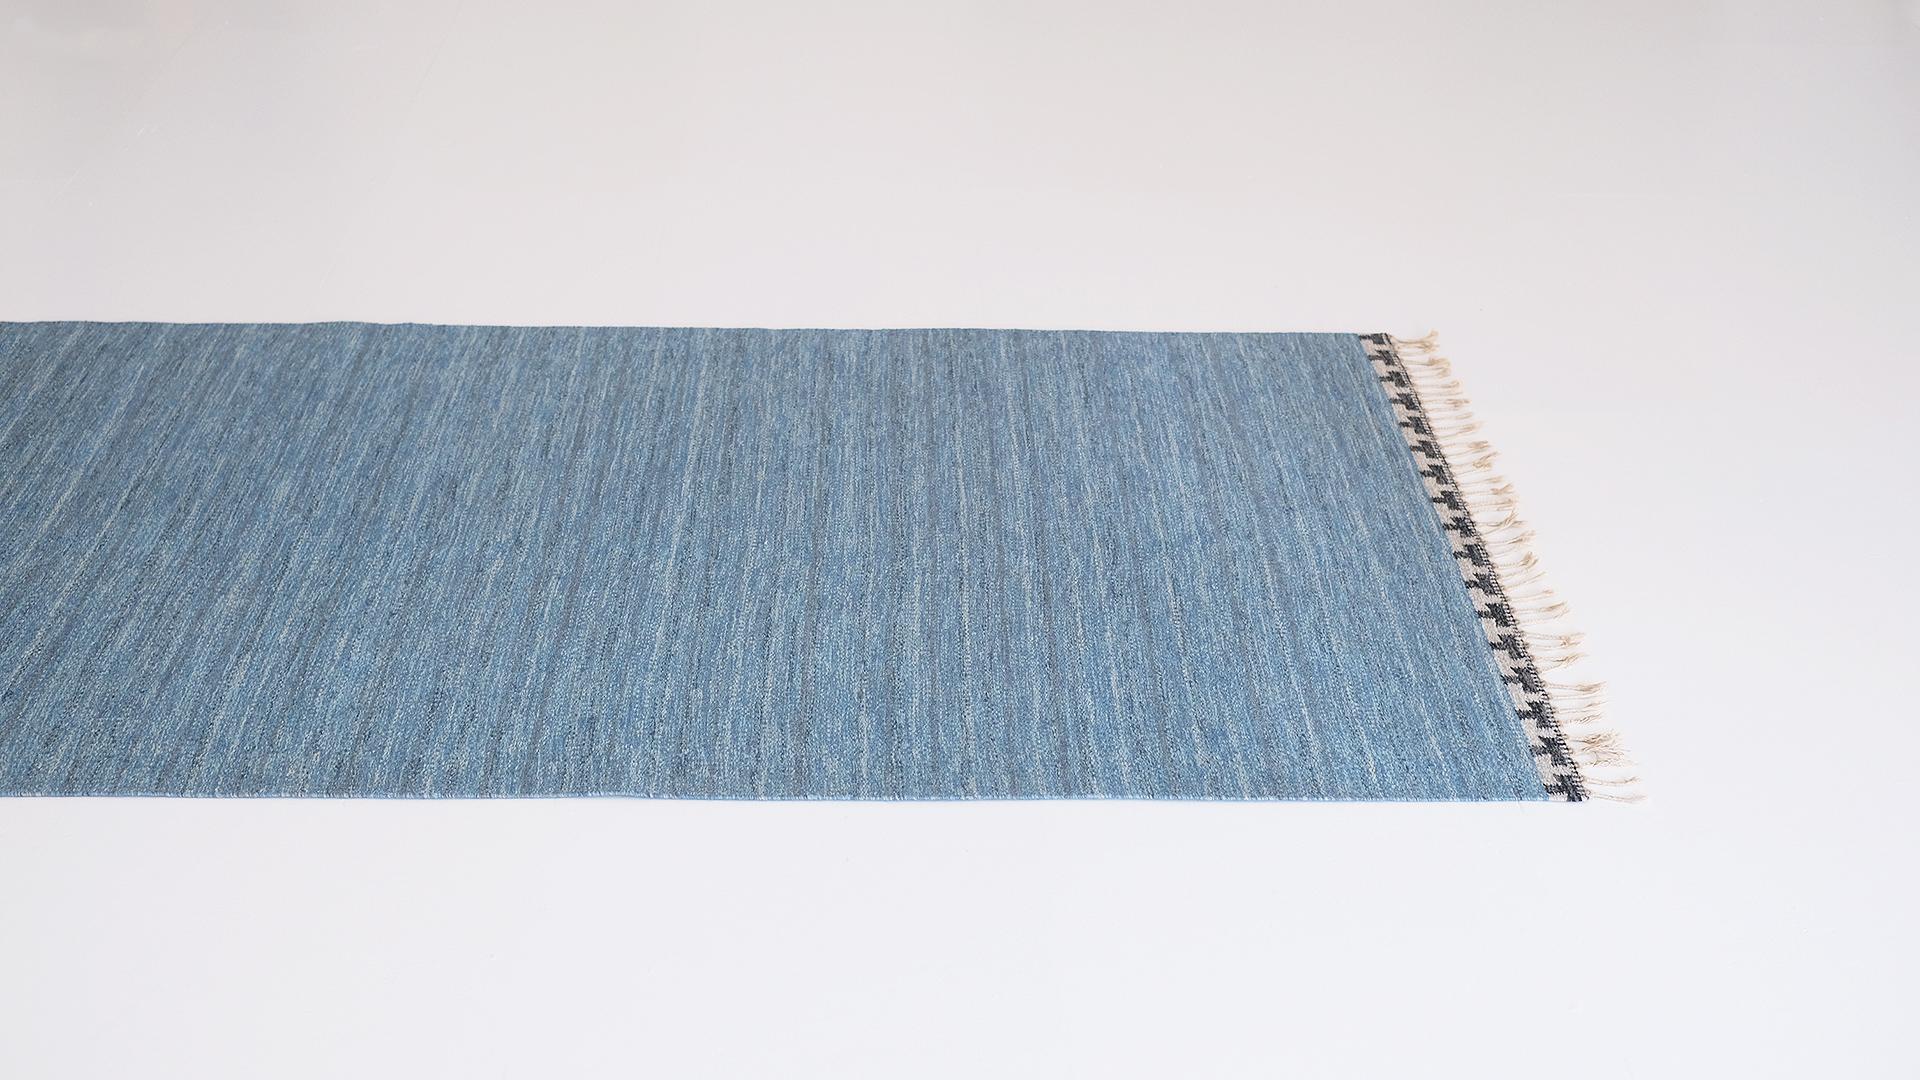 Beautiful Swedish flat-weave, Rolakan carpet by Rakel Carlander. Very simple blue mélange with signature black and grey edging. Very elegant piece in great original condition.